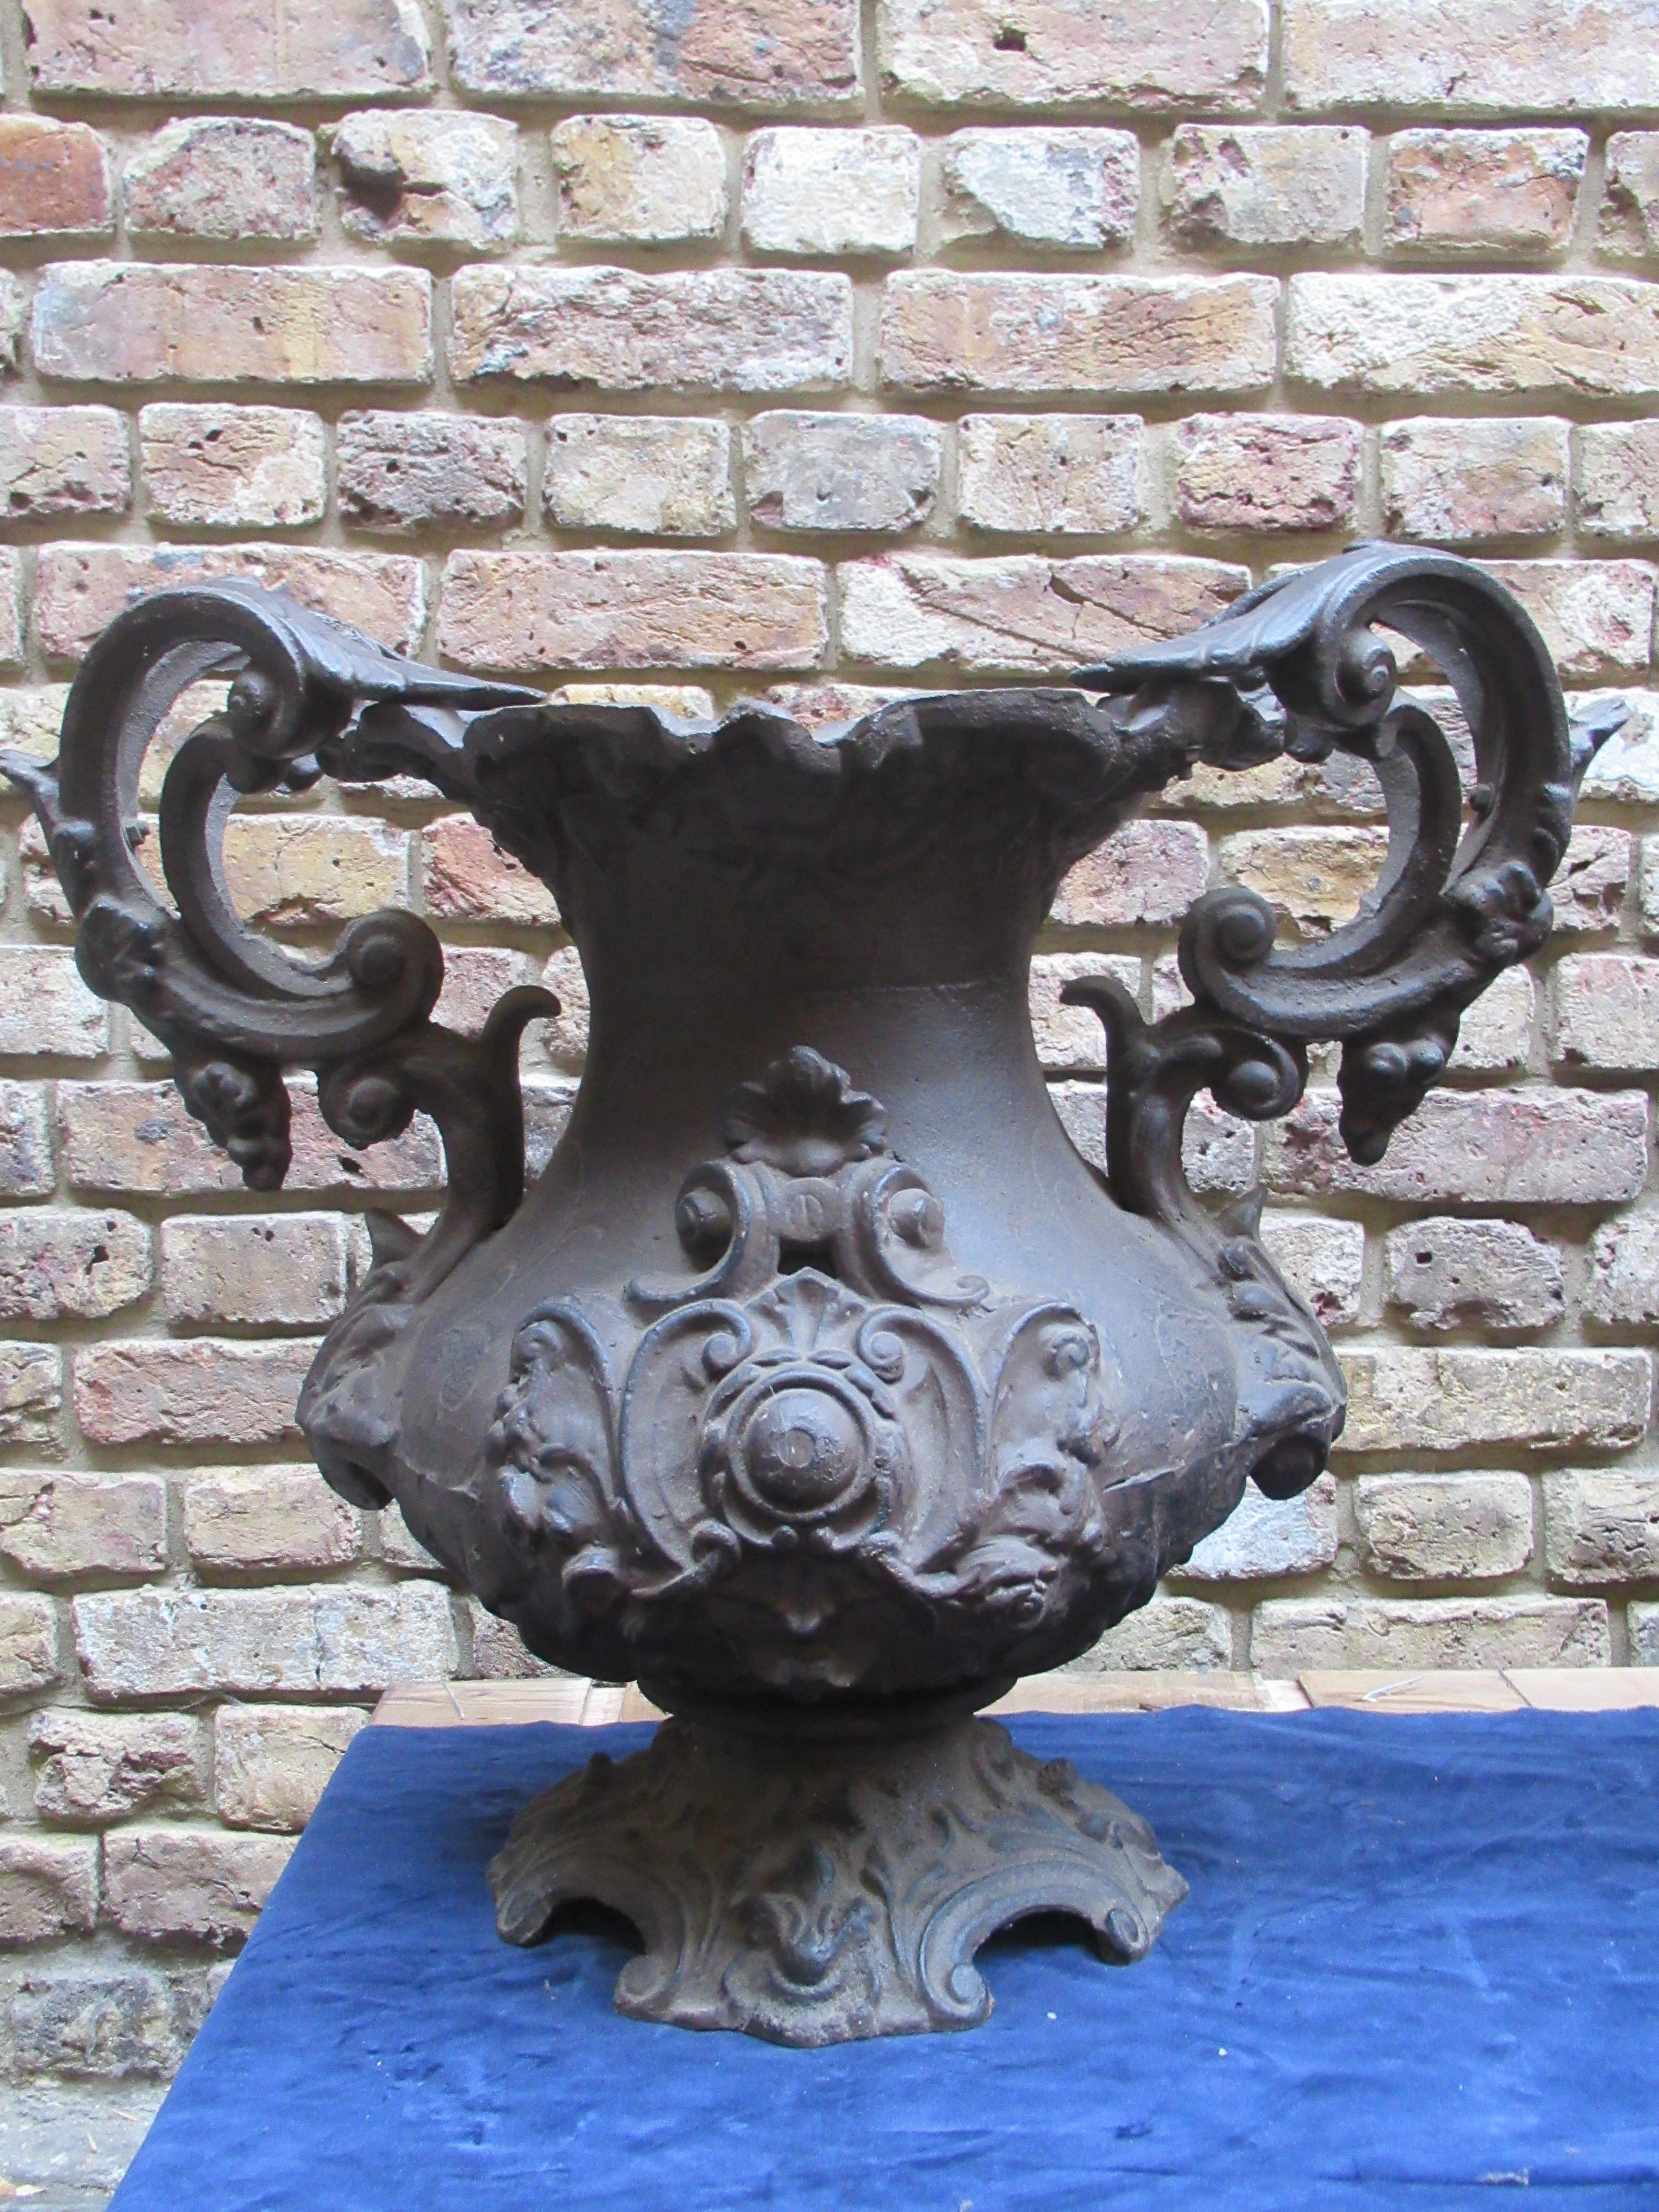 Pair of early 20th century cast iron urns with decorative foliate work and scroll handles.
Beautiful shape and detail with a good patina for the age.
Perfect for statement for your garden or entrance.